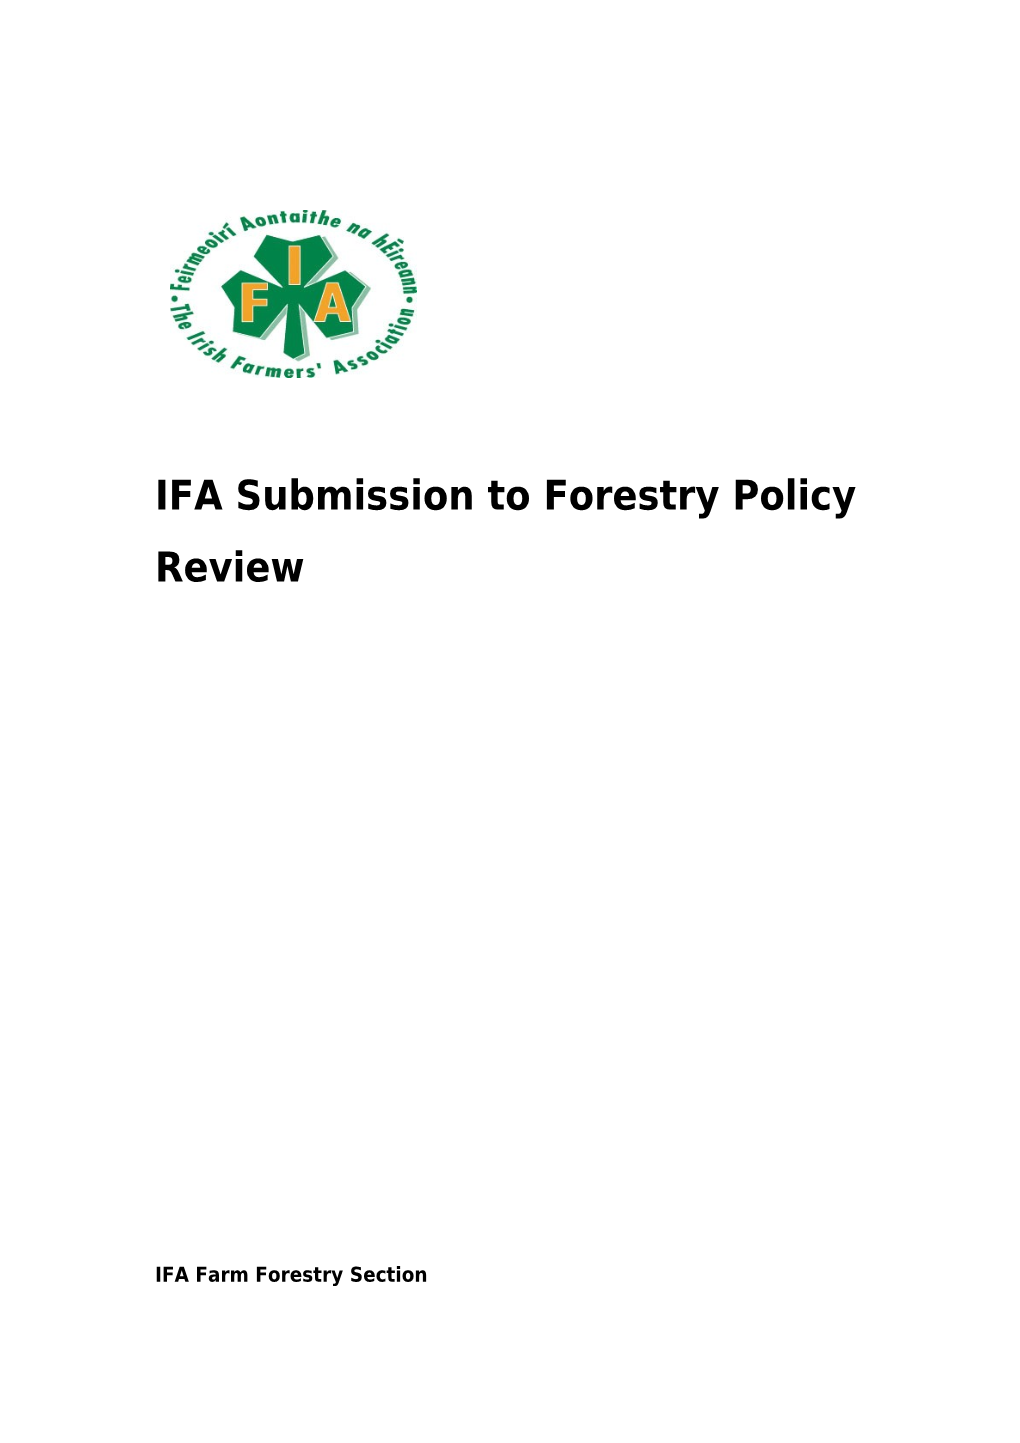 IFA Submission to Forestry Policy Review